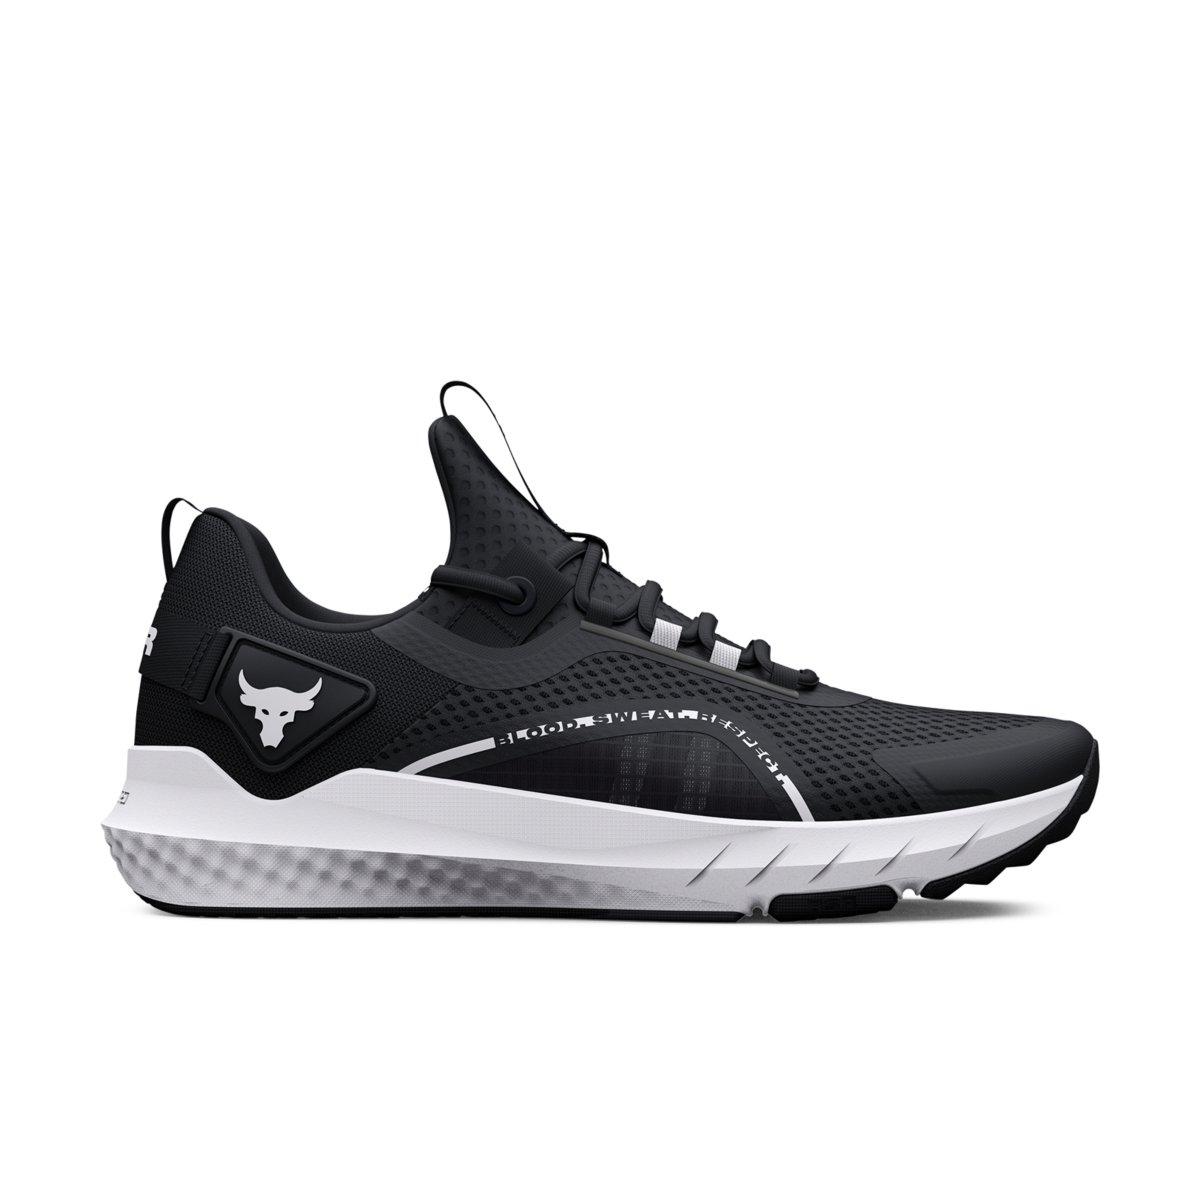 The Under Armour Project Rock 3 Debuts in Black/Grey on